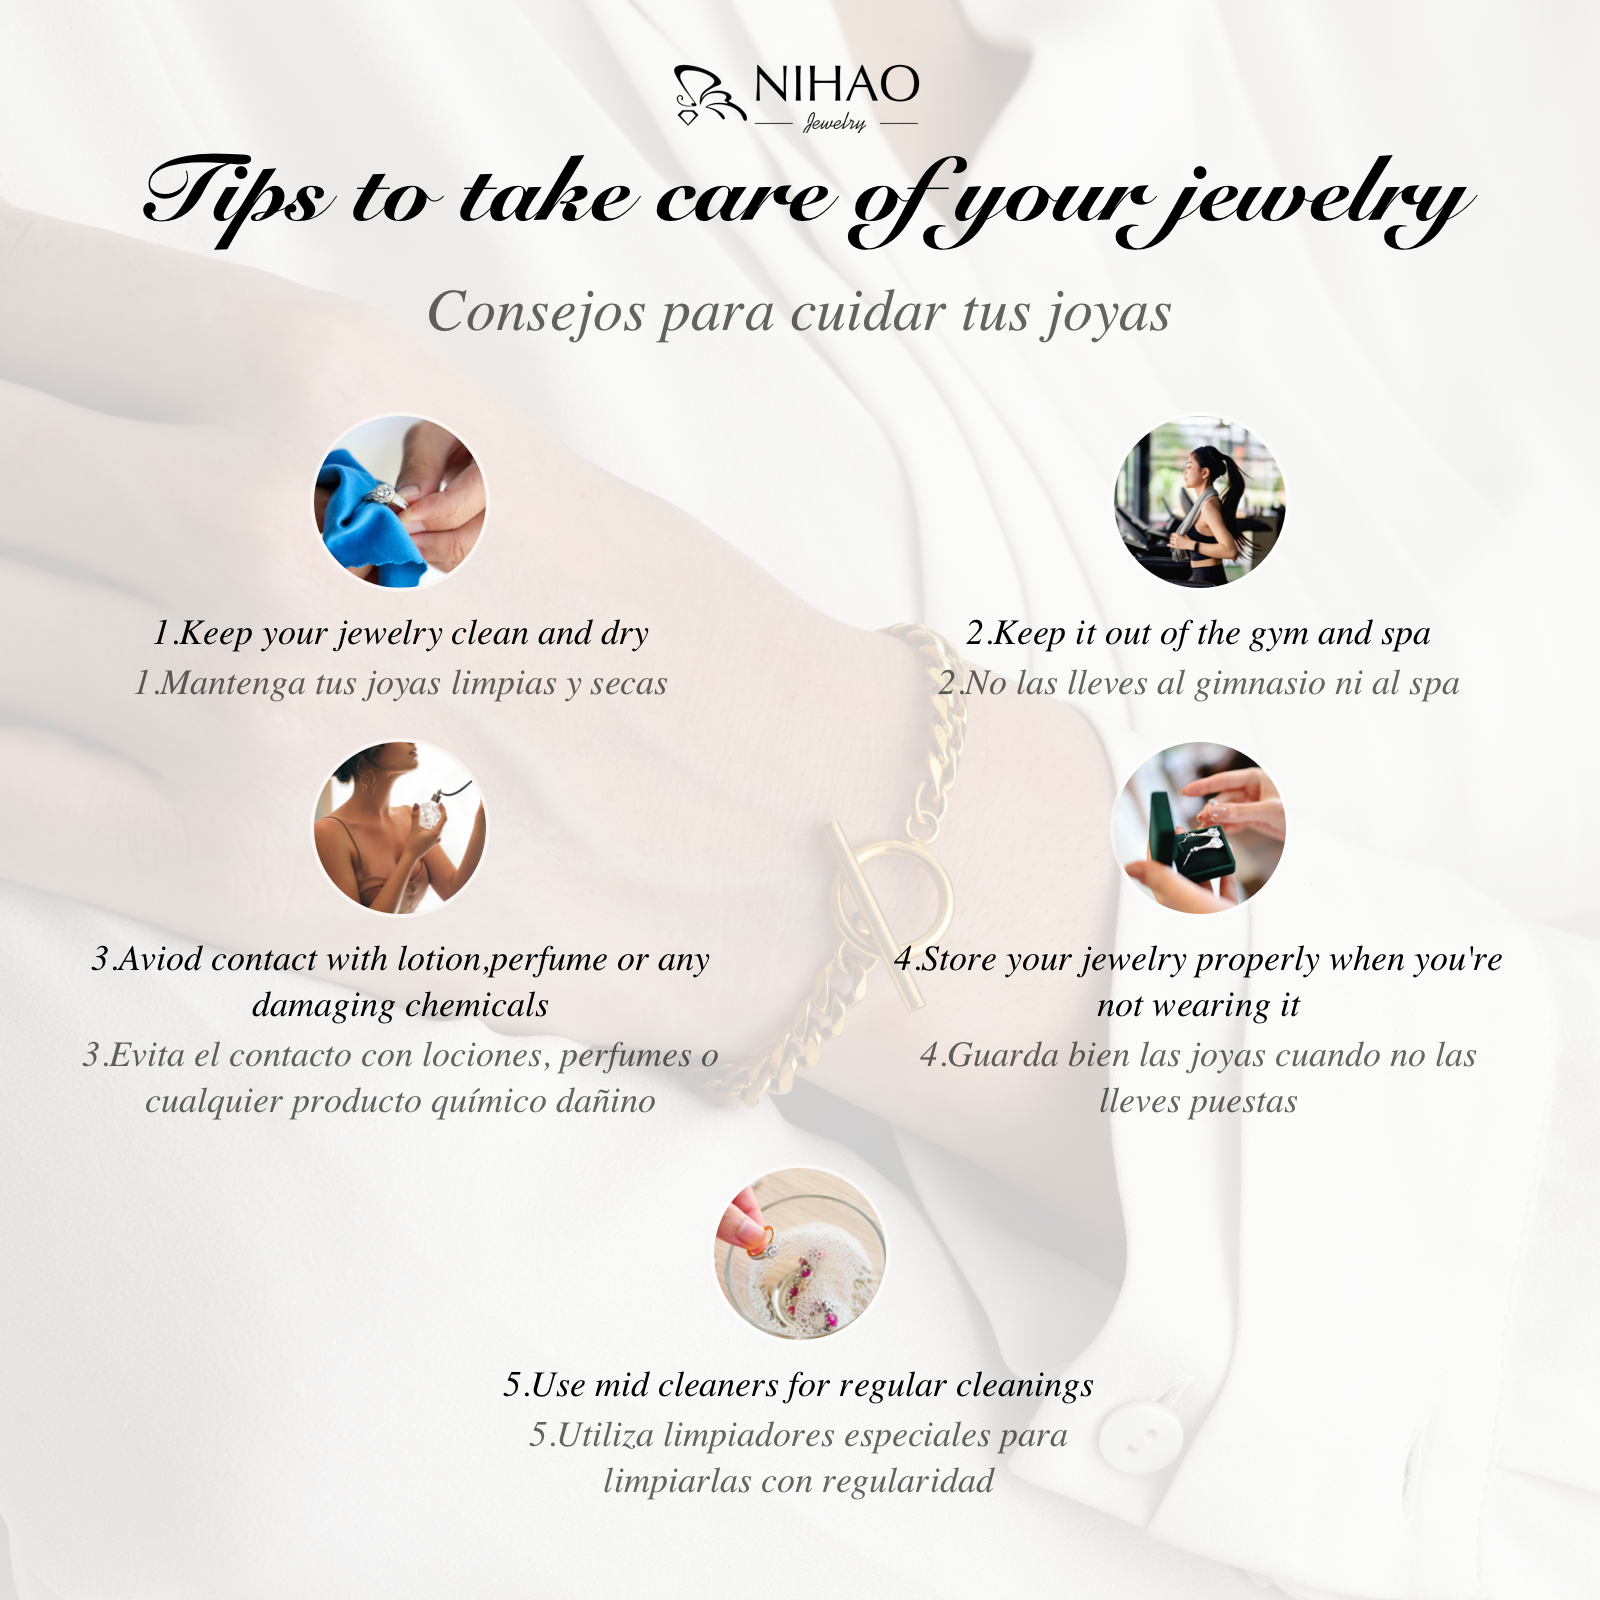 How to Take Care of Your Jewelry 5 Tips to Make It Bling